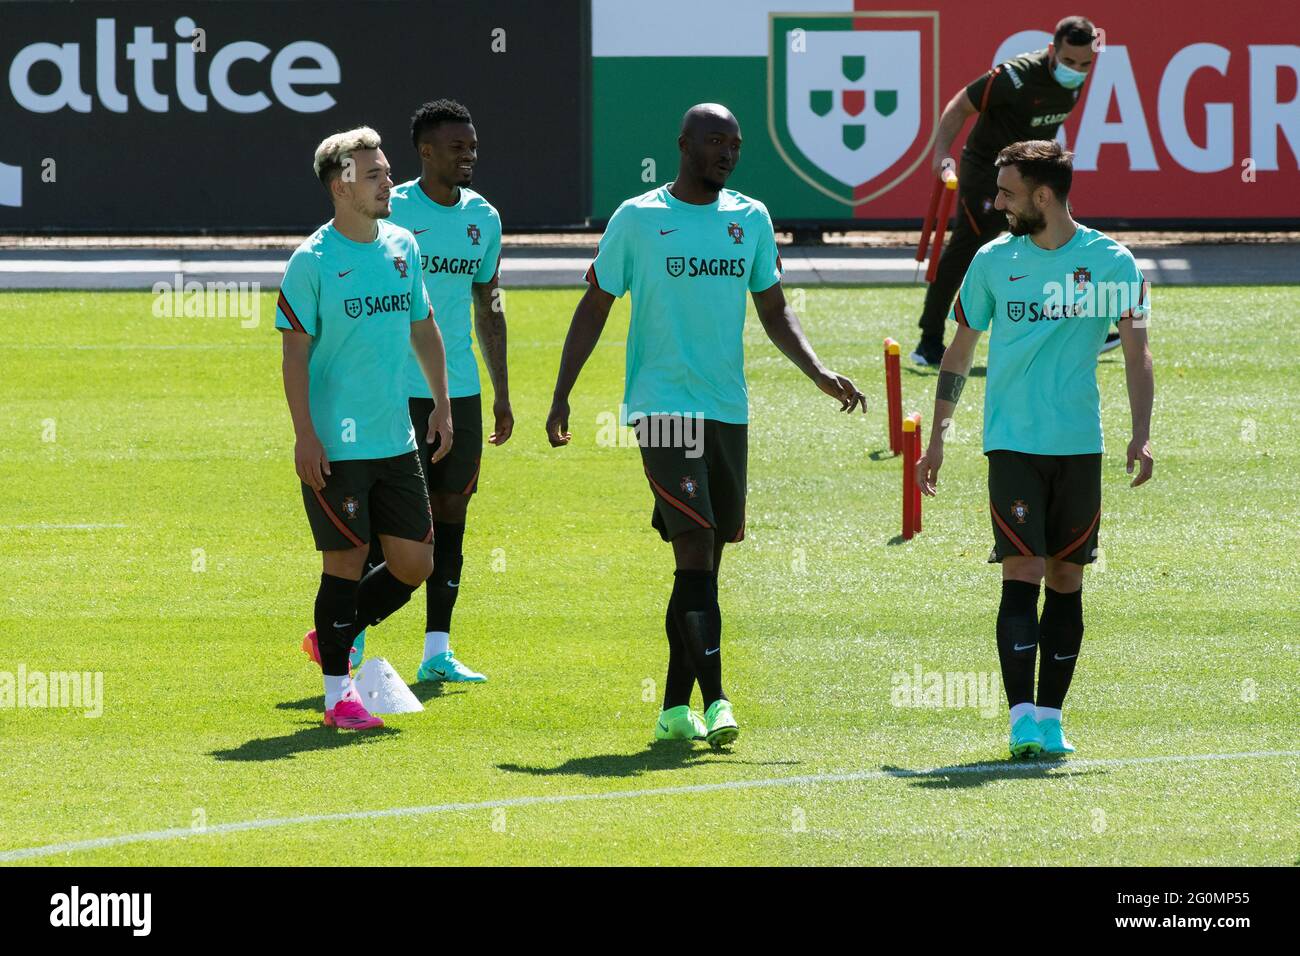 Pedro Goncalves, Nelson Semedo, Danilo Pereira and Bruno Fernandes (L-R) in action during the training session at Cidade do Futebol training ground.Portugal football team trains before competing in the European football championship - EURO 2020 - scheduled to start on June 11th. (Photo by Hugo Amaral / SOPA Images/Sipa USA) Stock Photo